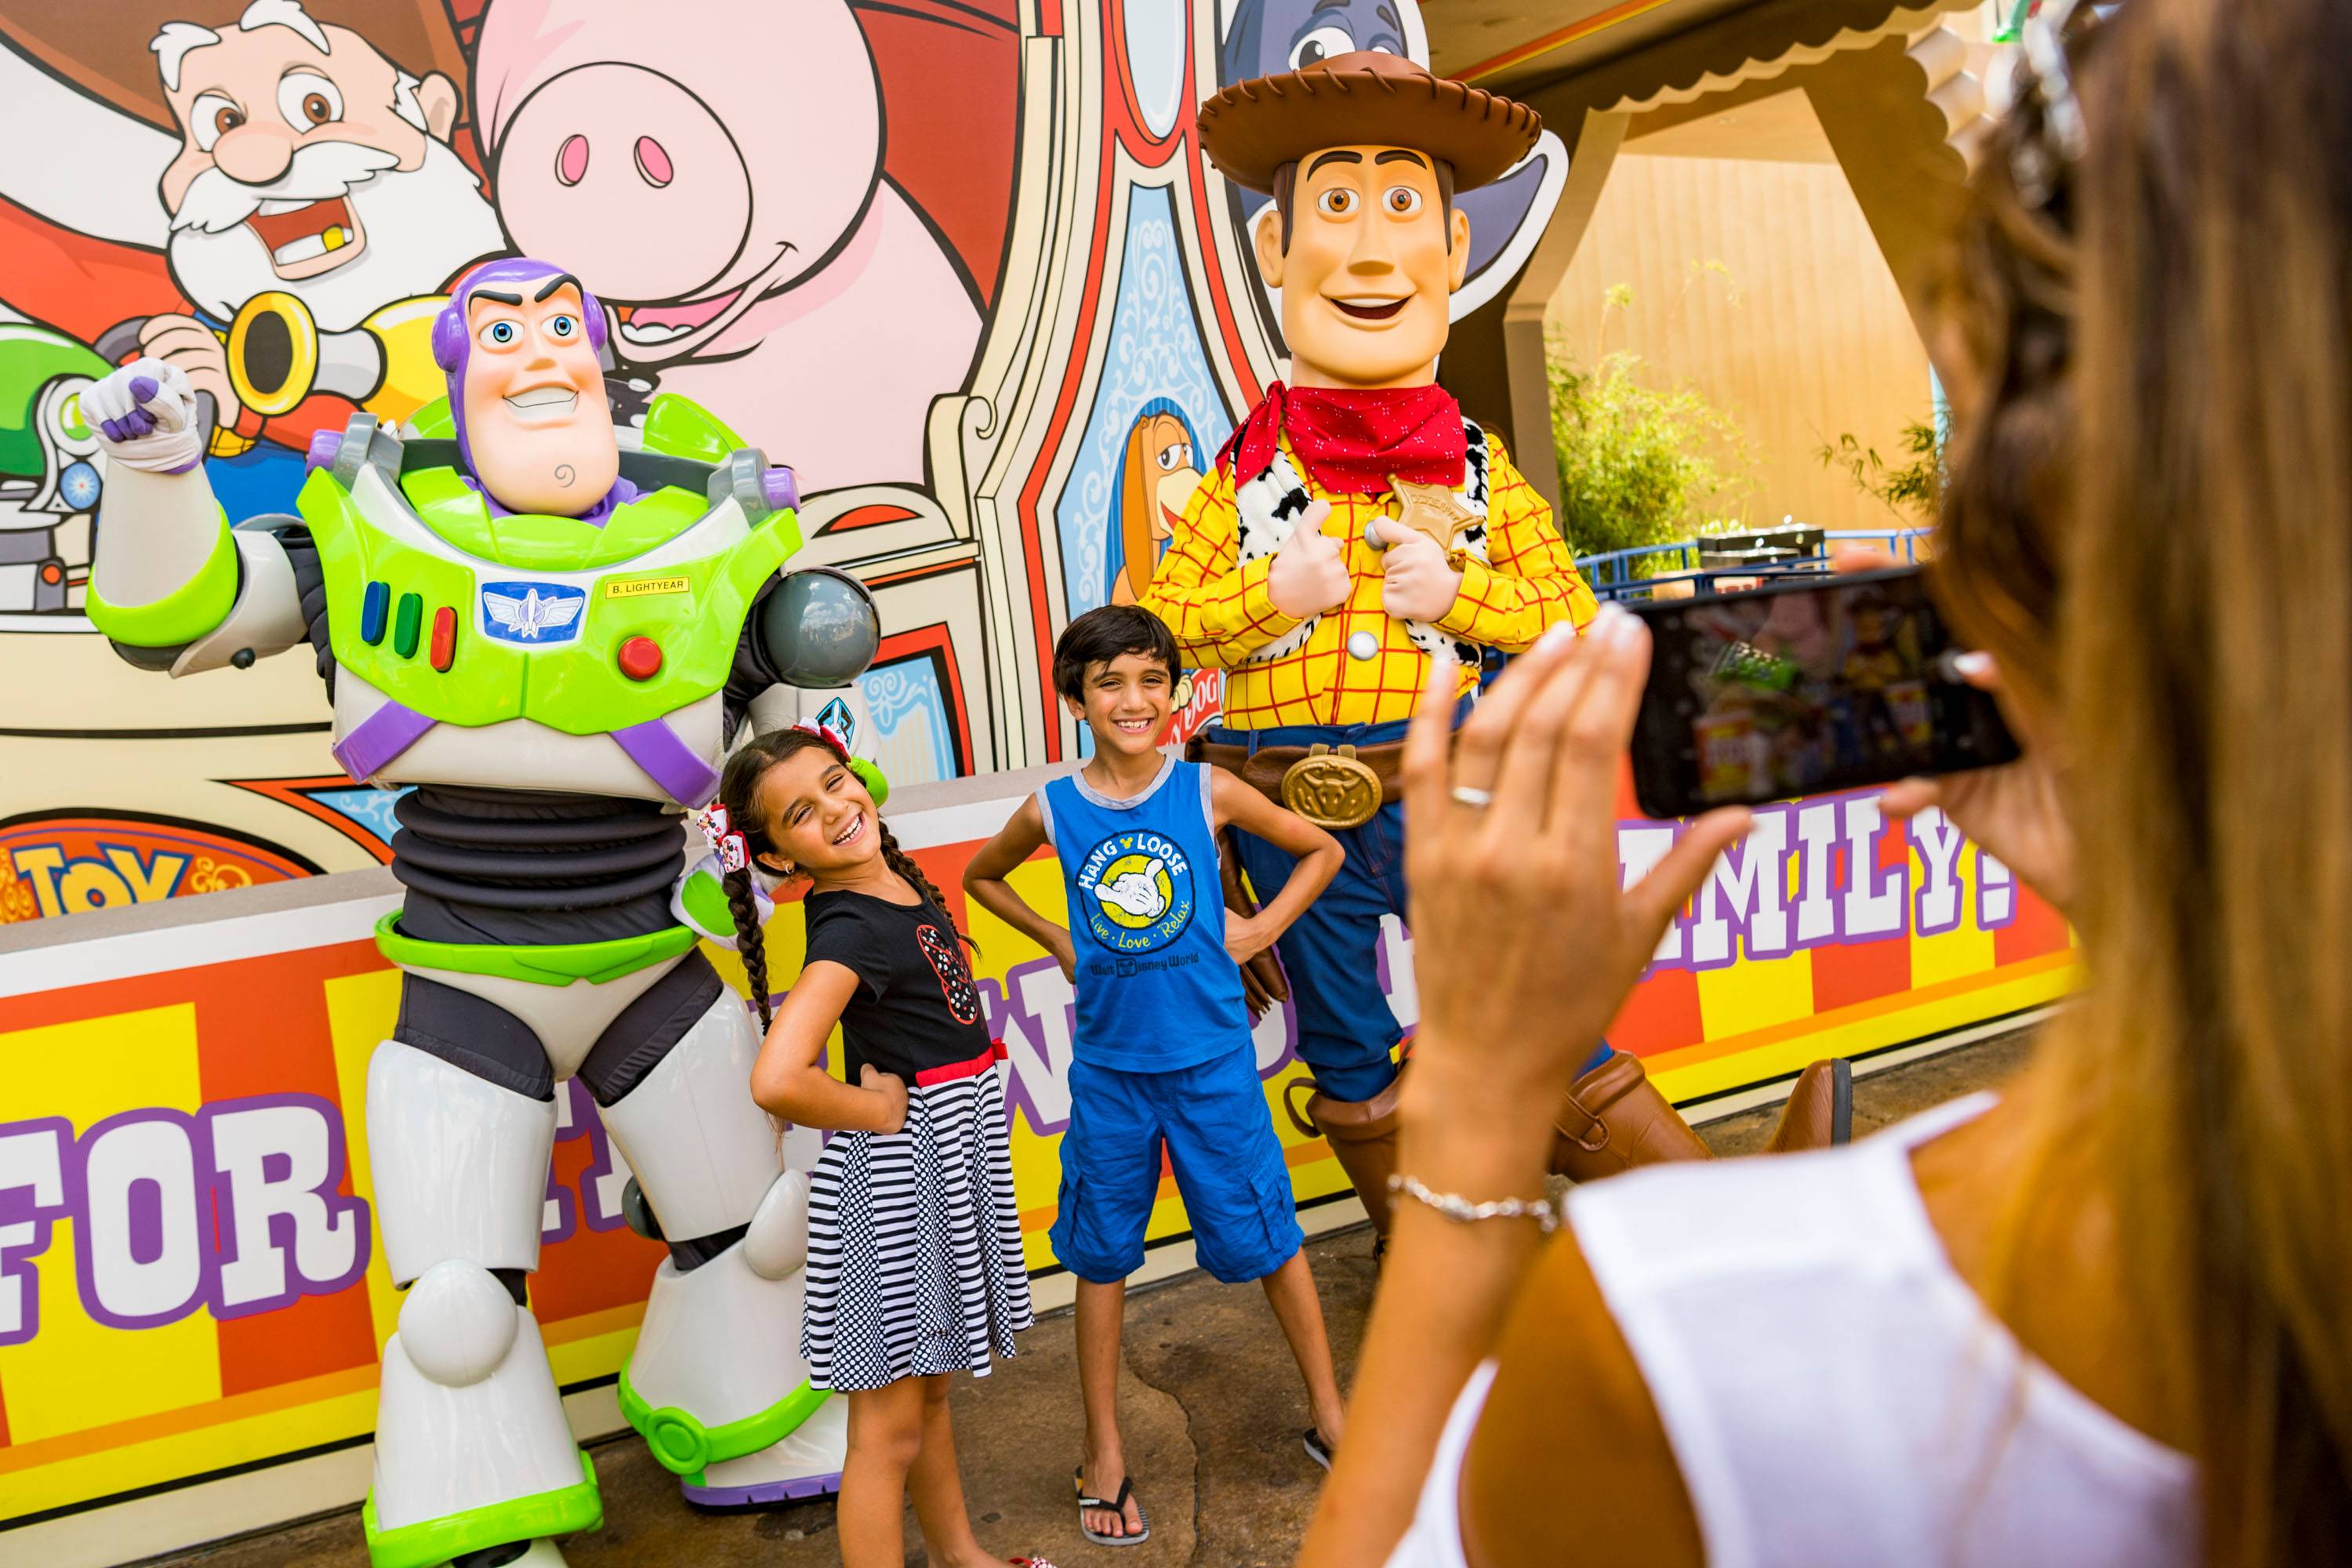 Wood and Buzz meet and greet at Toy Story Land